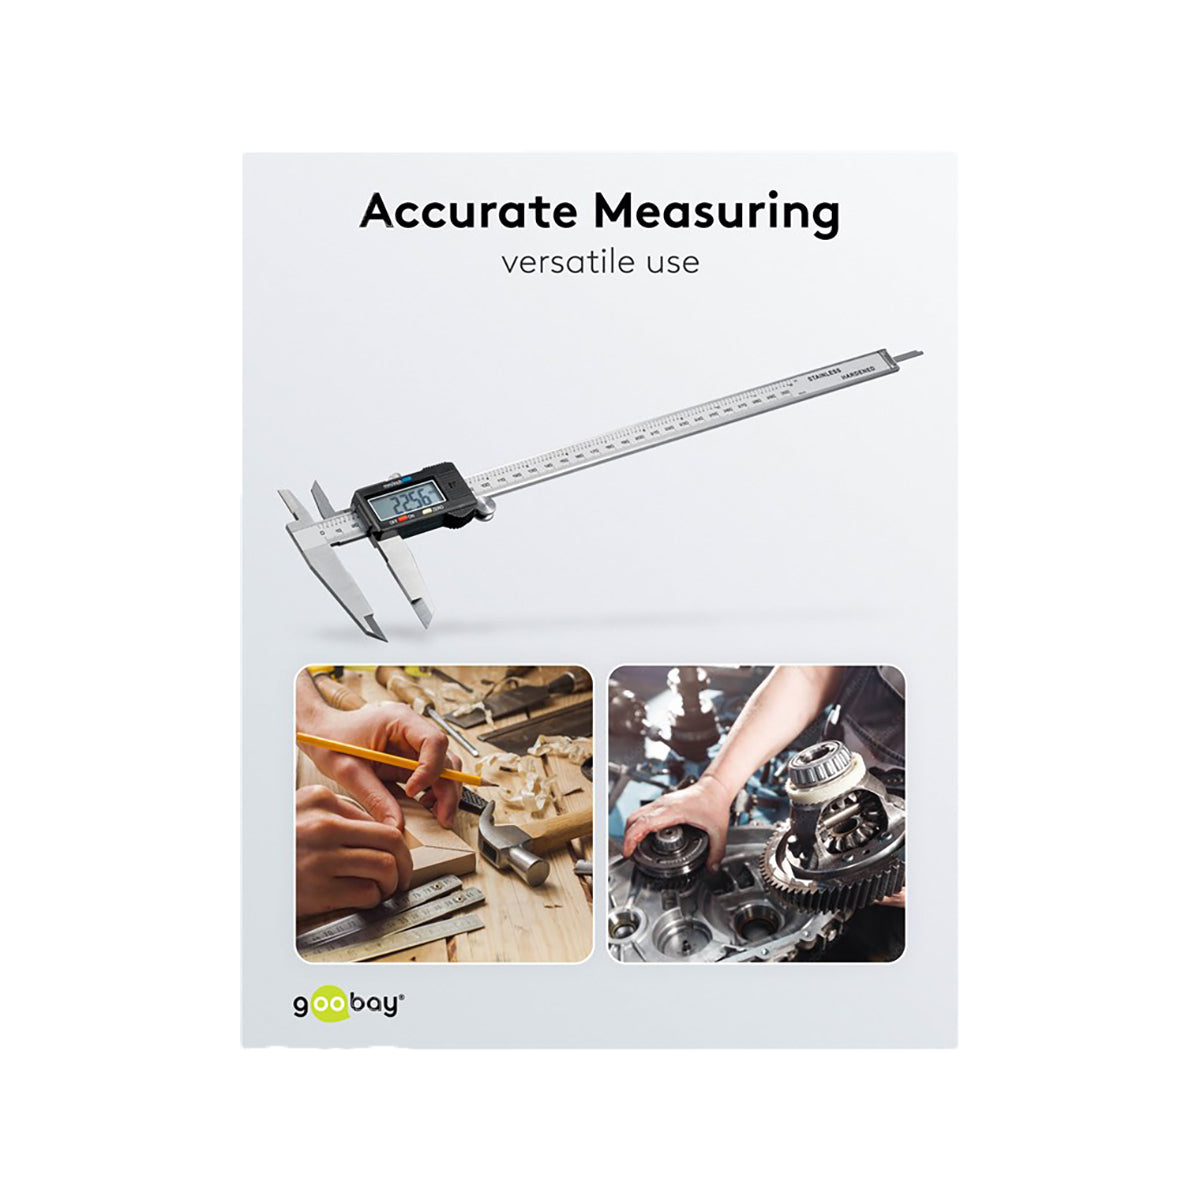 Goobay Digital Caliper 300 mm / 12 Inch for Measurements from 0 mm - 300 mm